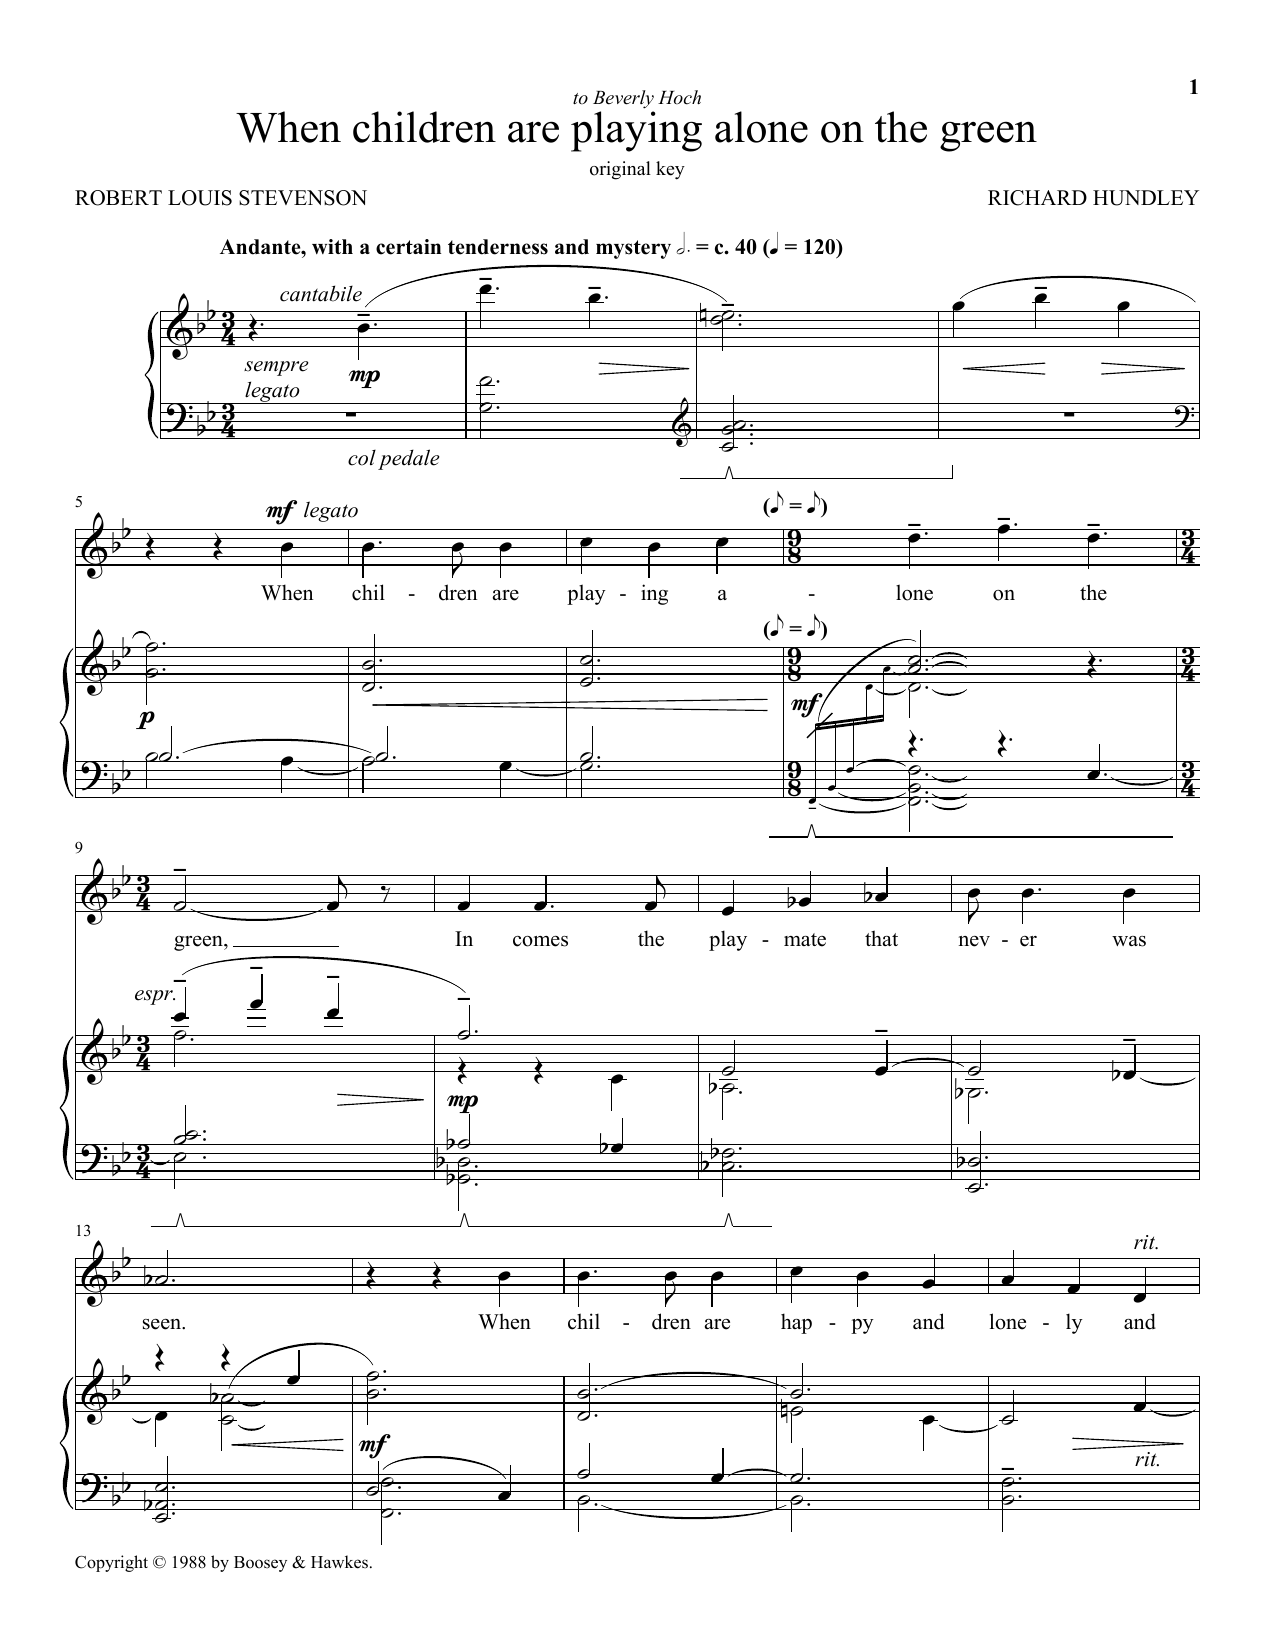 Download Robert Louis Stevenson When Children Are Playing Alone On The Sheet Music